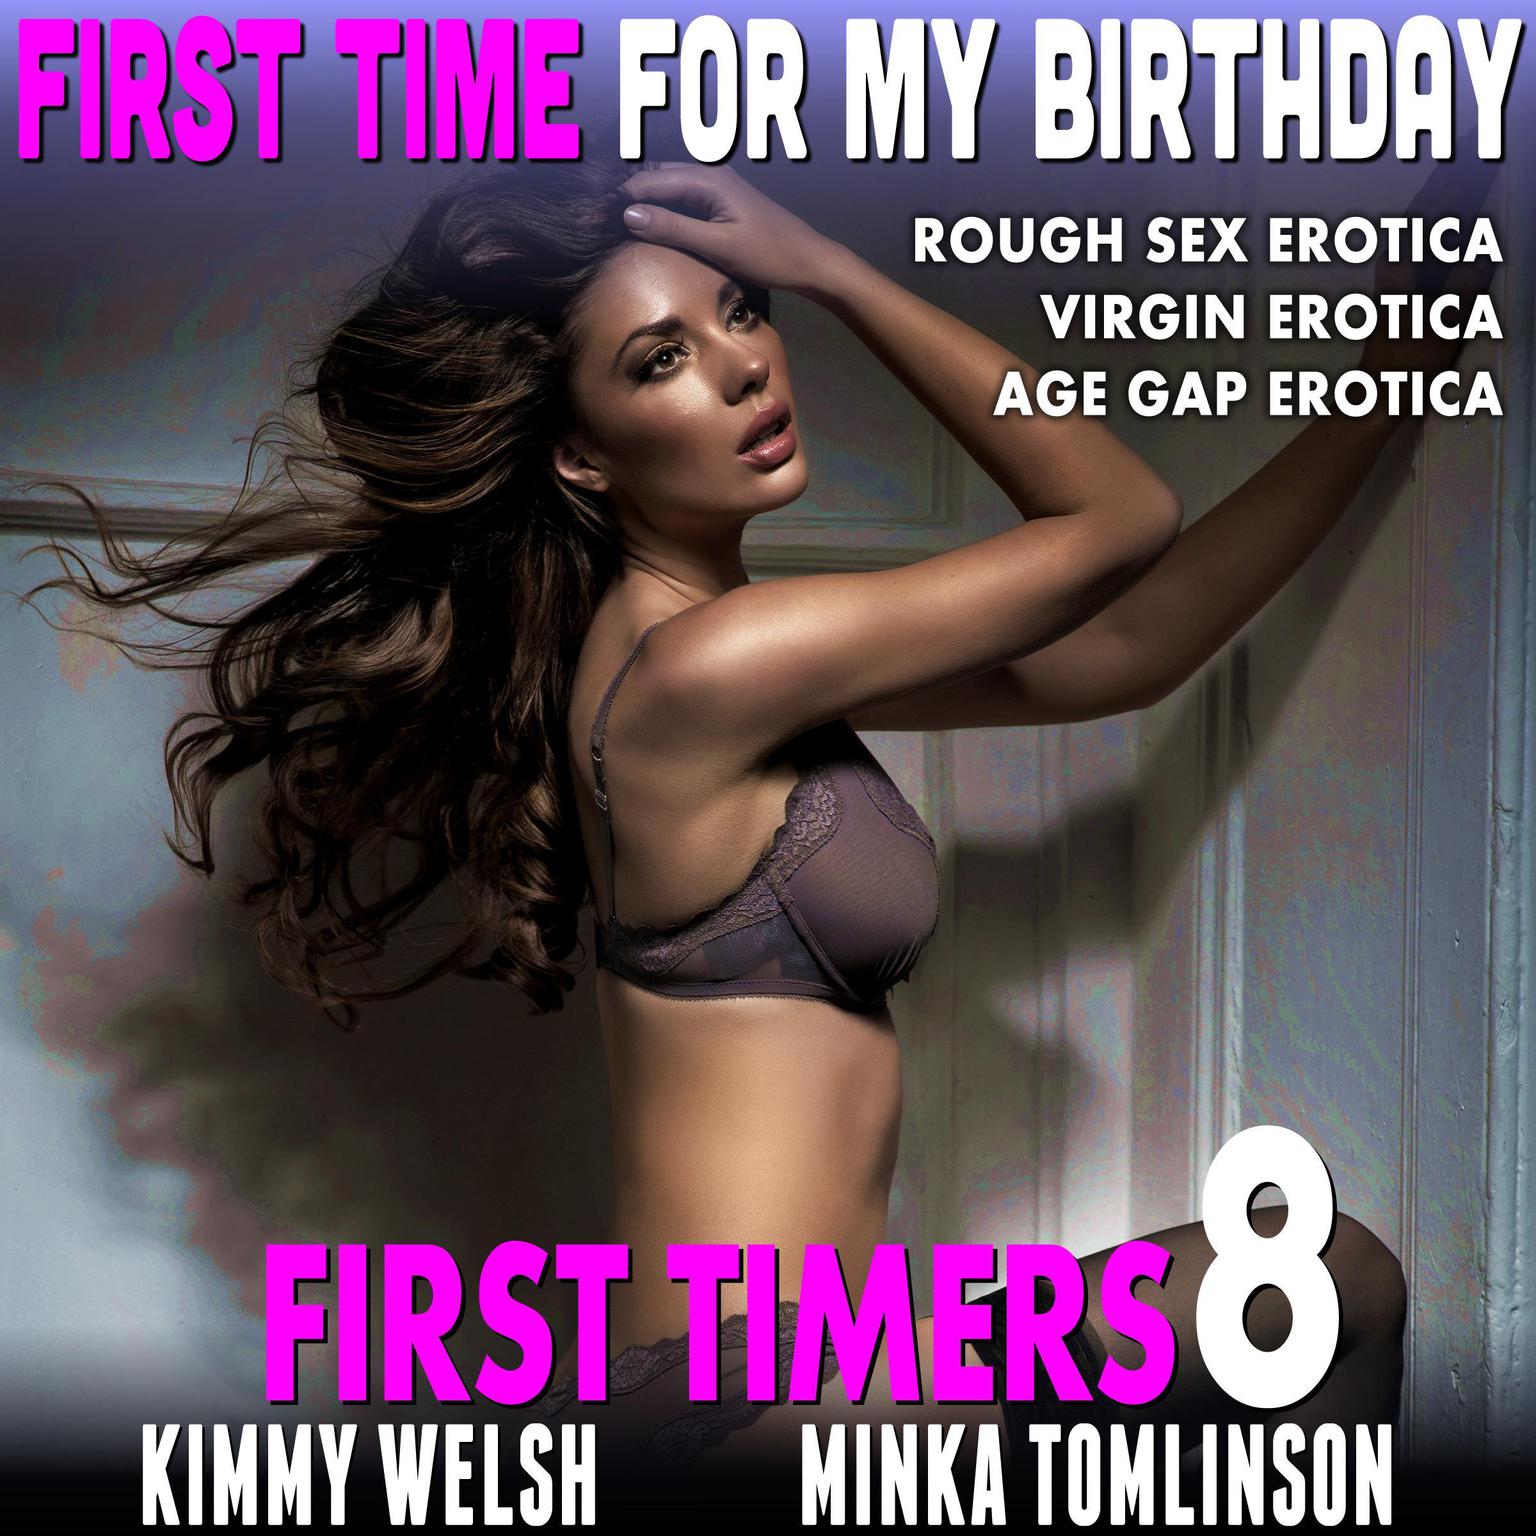 First Time For My Birthday First Timers Rough Sex Erotica Virgin Erotica Age Gap Erotica